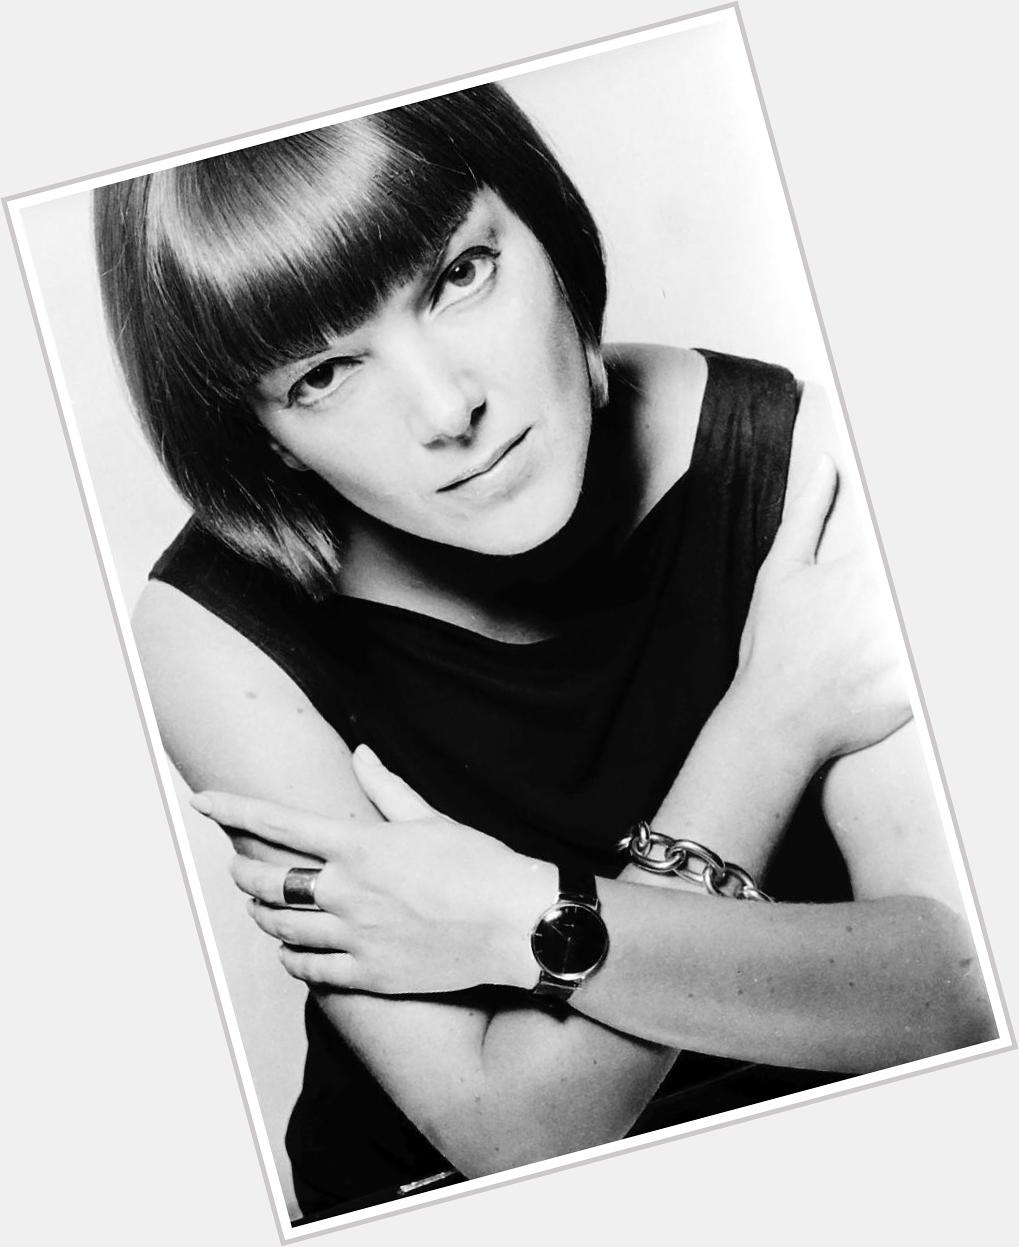 Without Mary Quant, the world would be missing something... Happy Birthday Mary! (Photo by Terence Donovan) 